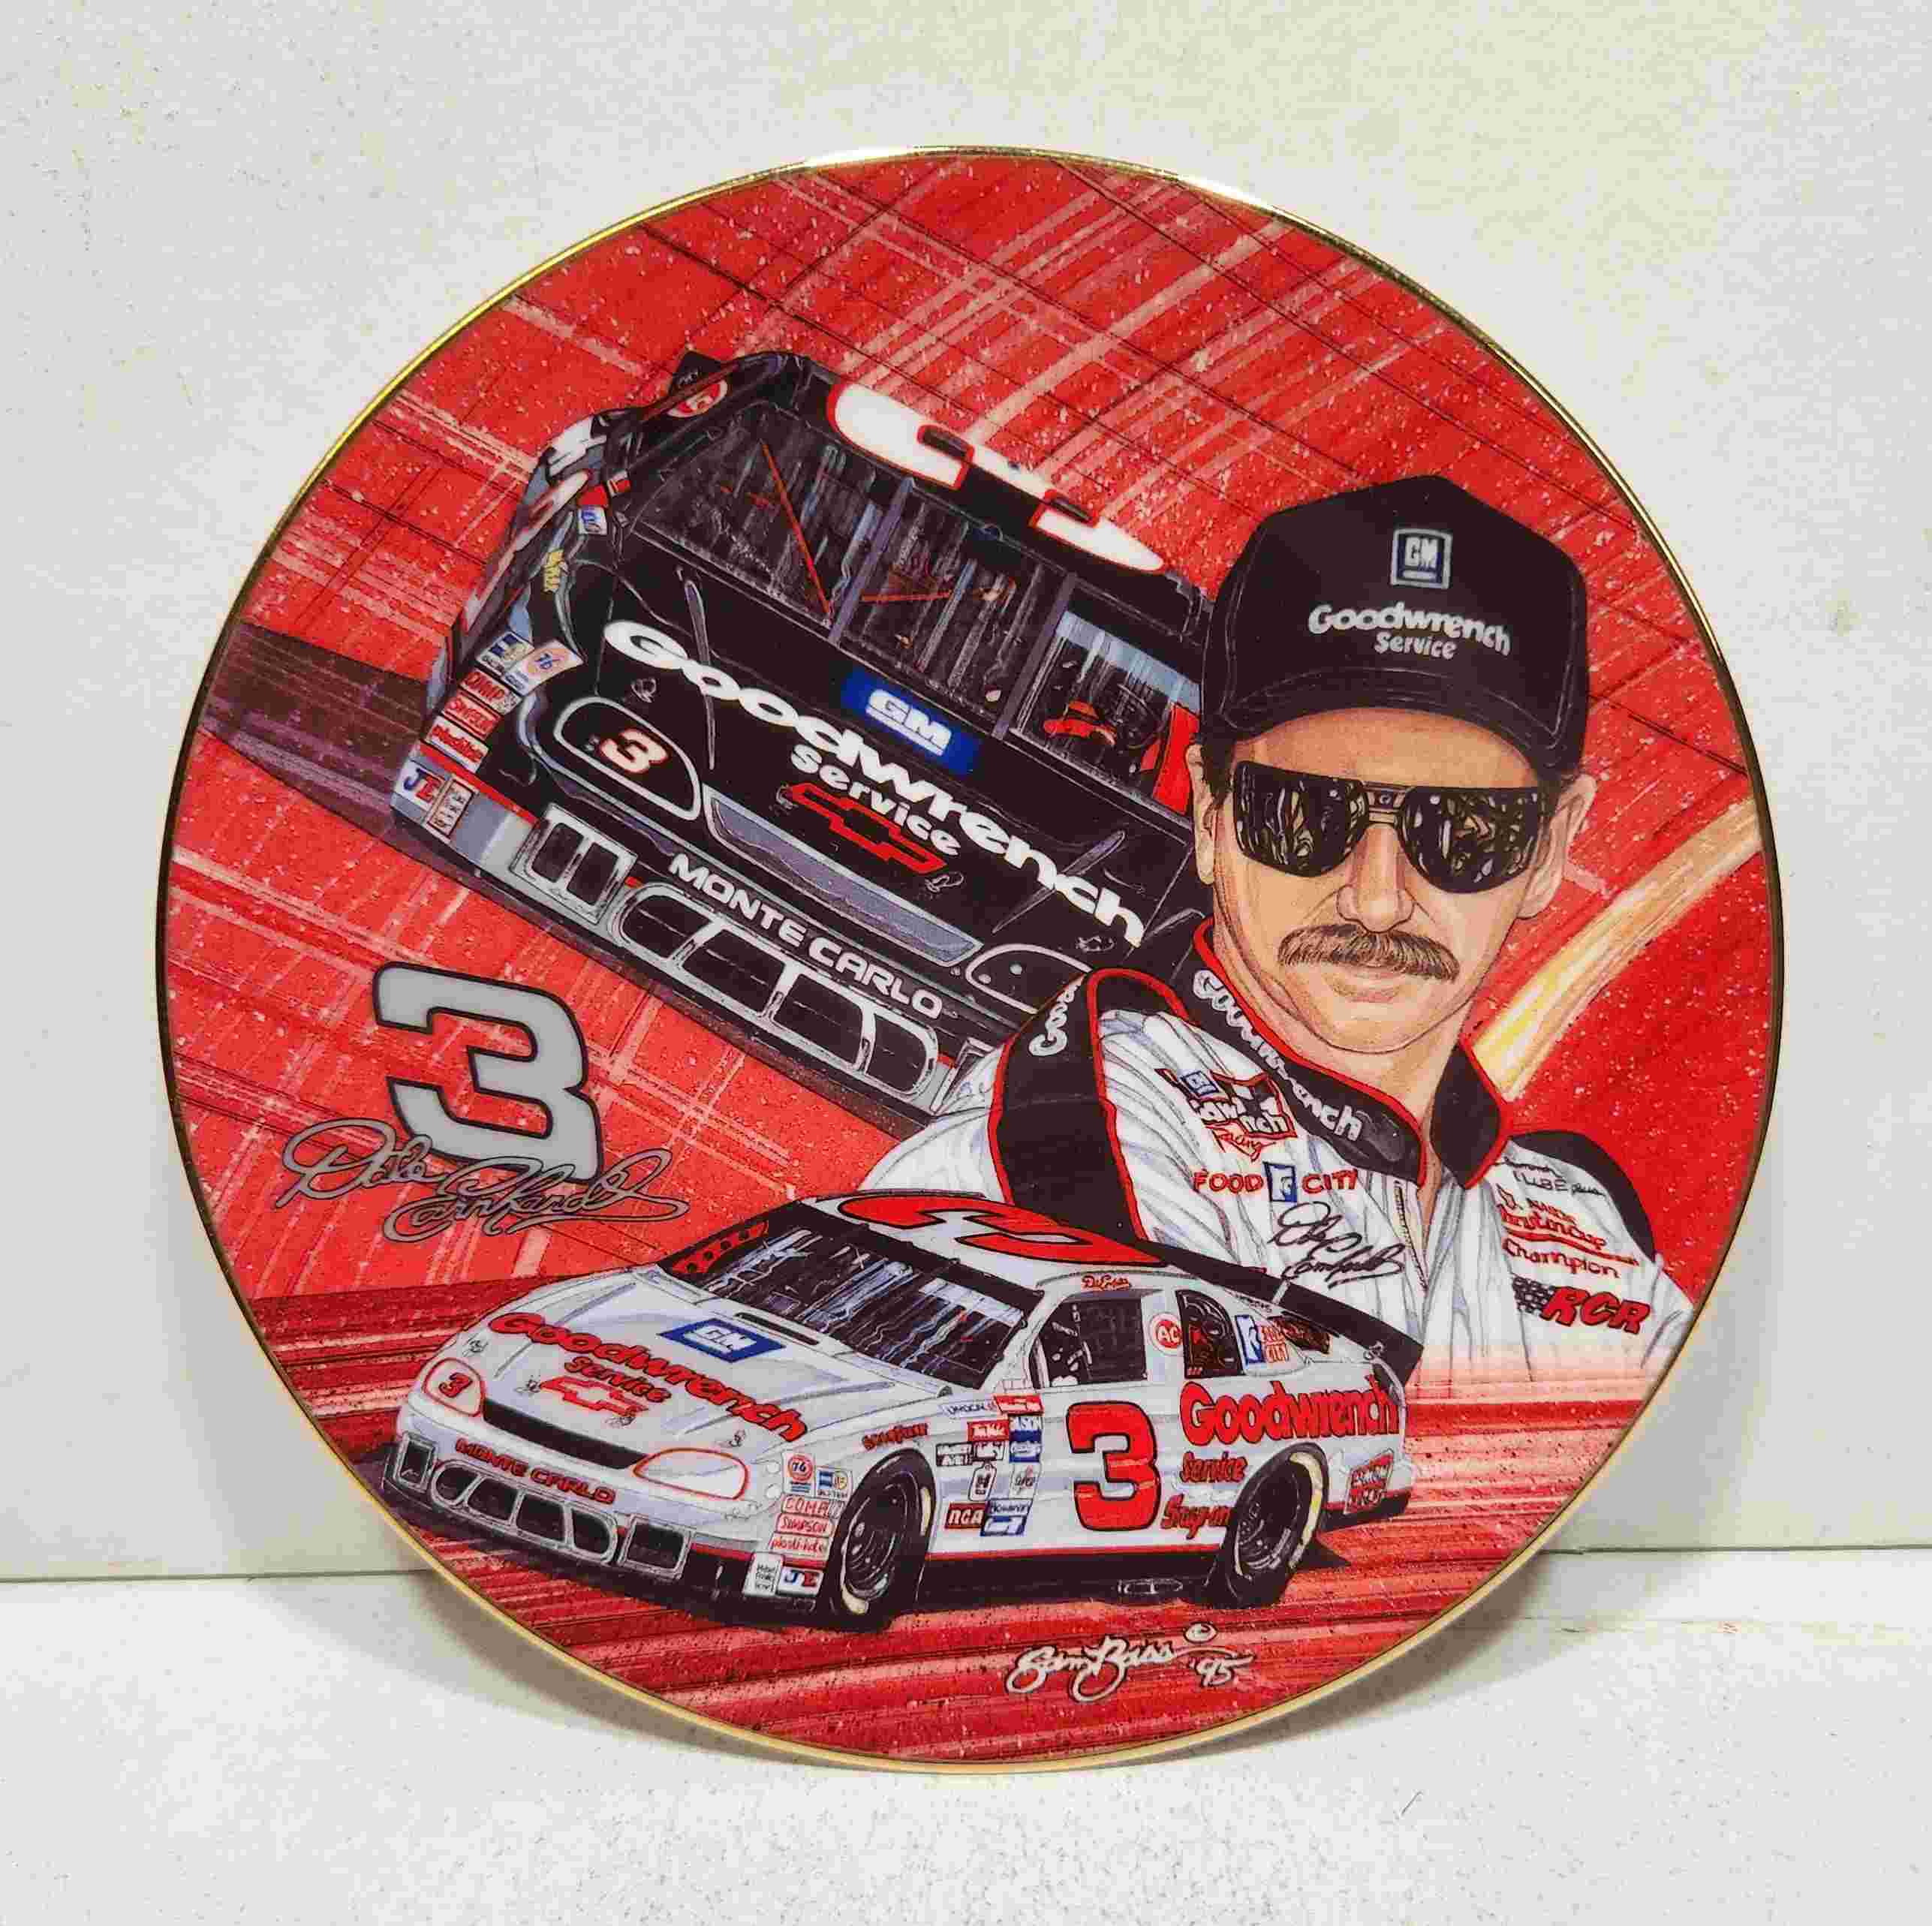 2001 Dale Earnhardt Collector Plate "Silver Select" by The Hamilton Collection